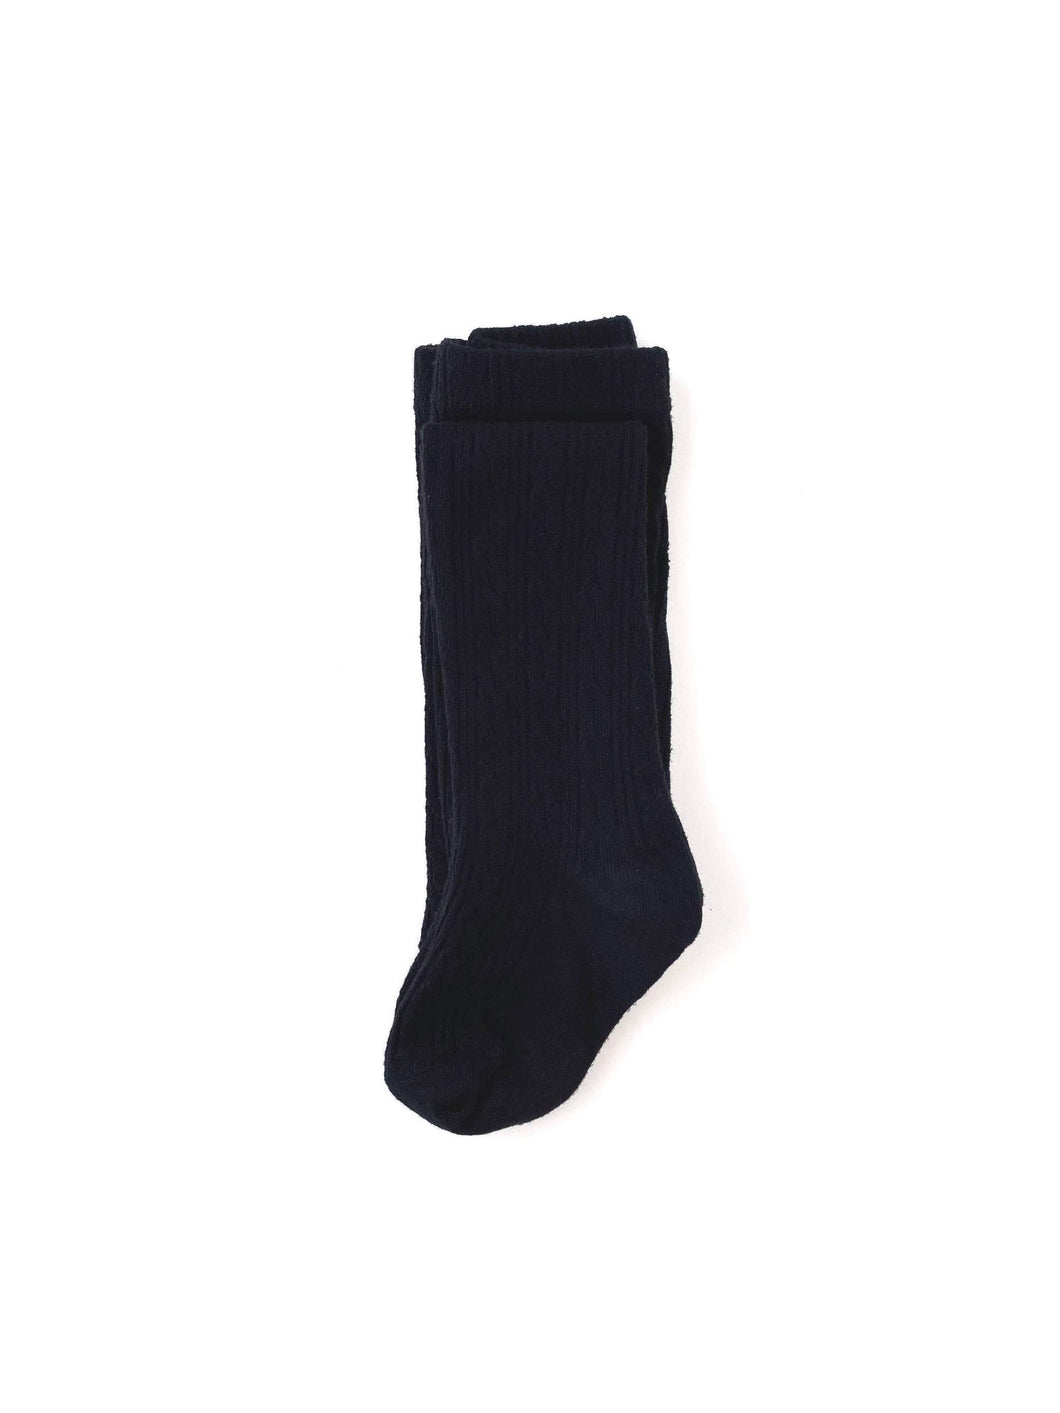 Little Stocking Co. Black Cable Knit Tights